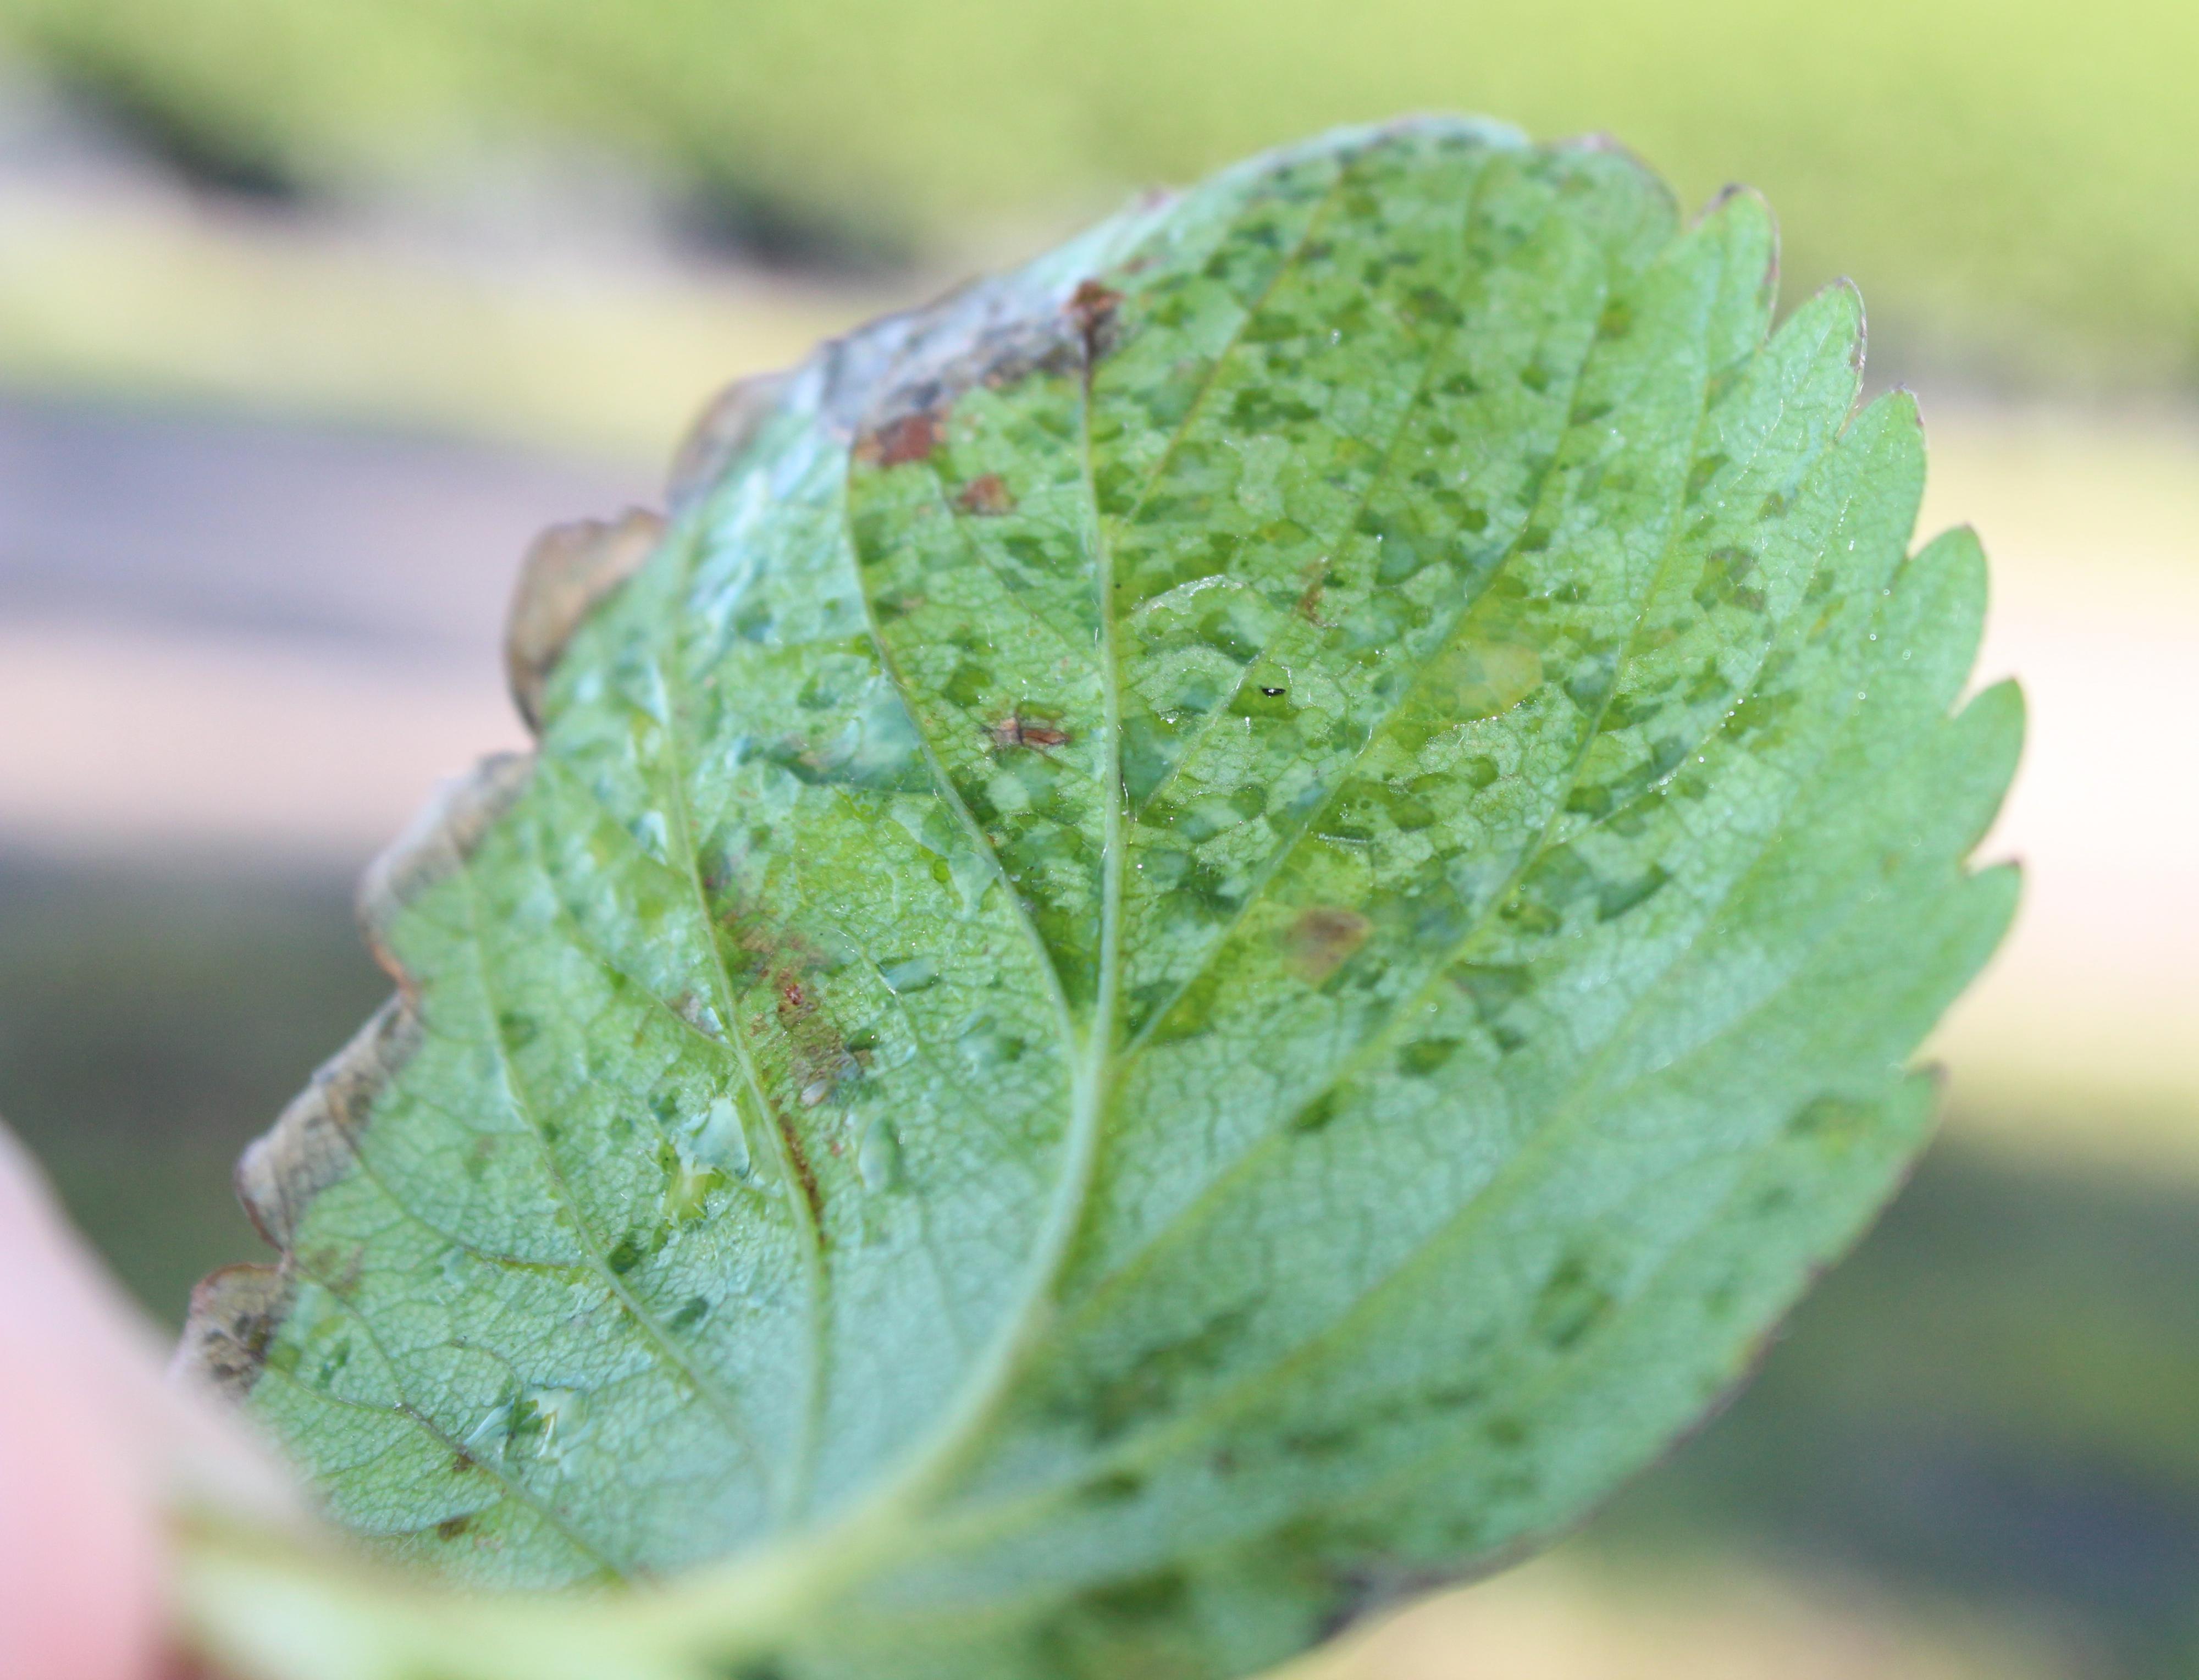 Angular leaf spot lesions initially appear water-soaked (Gauthier, UKY)